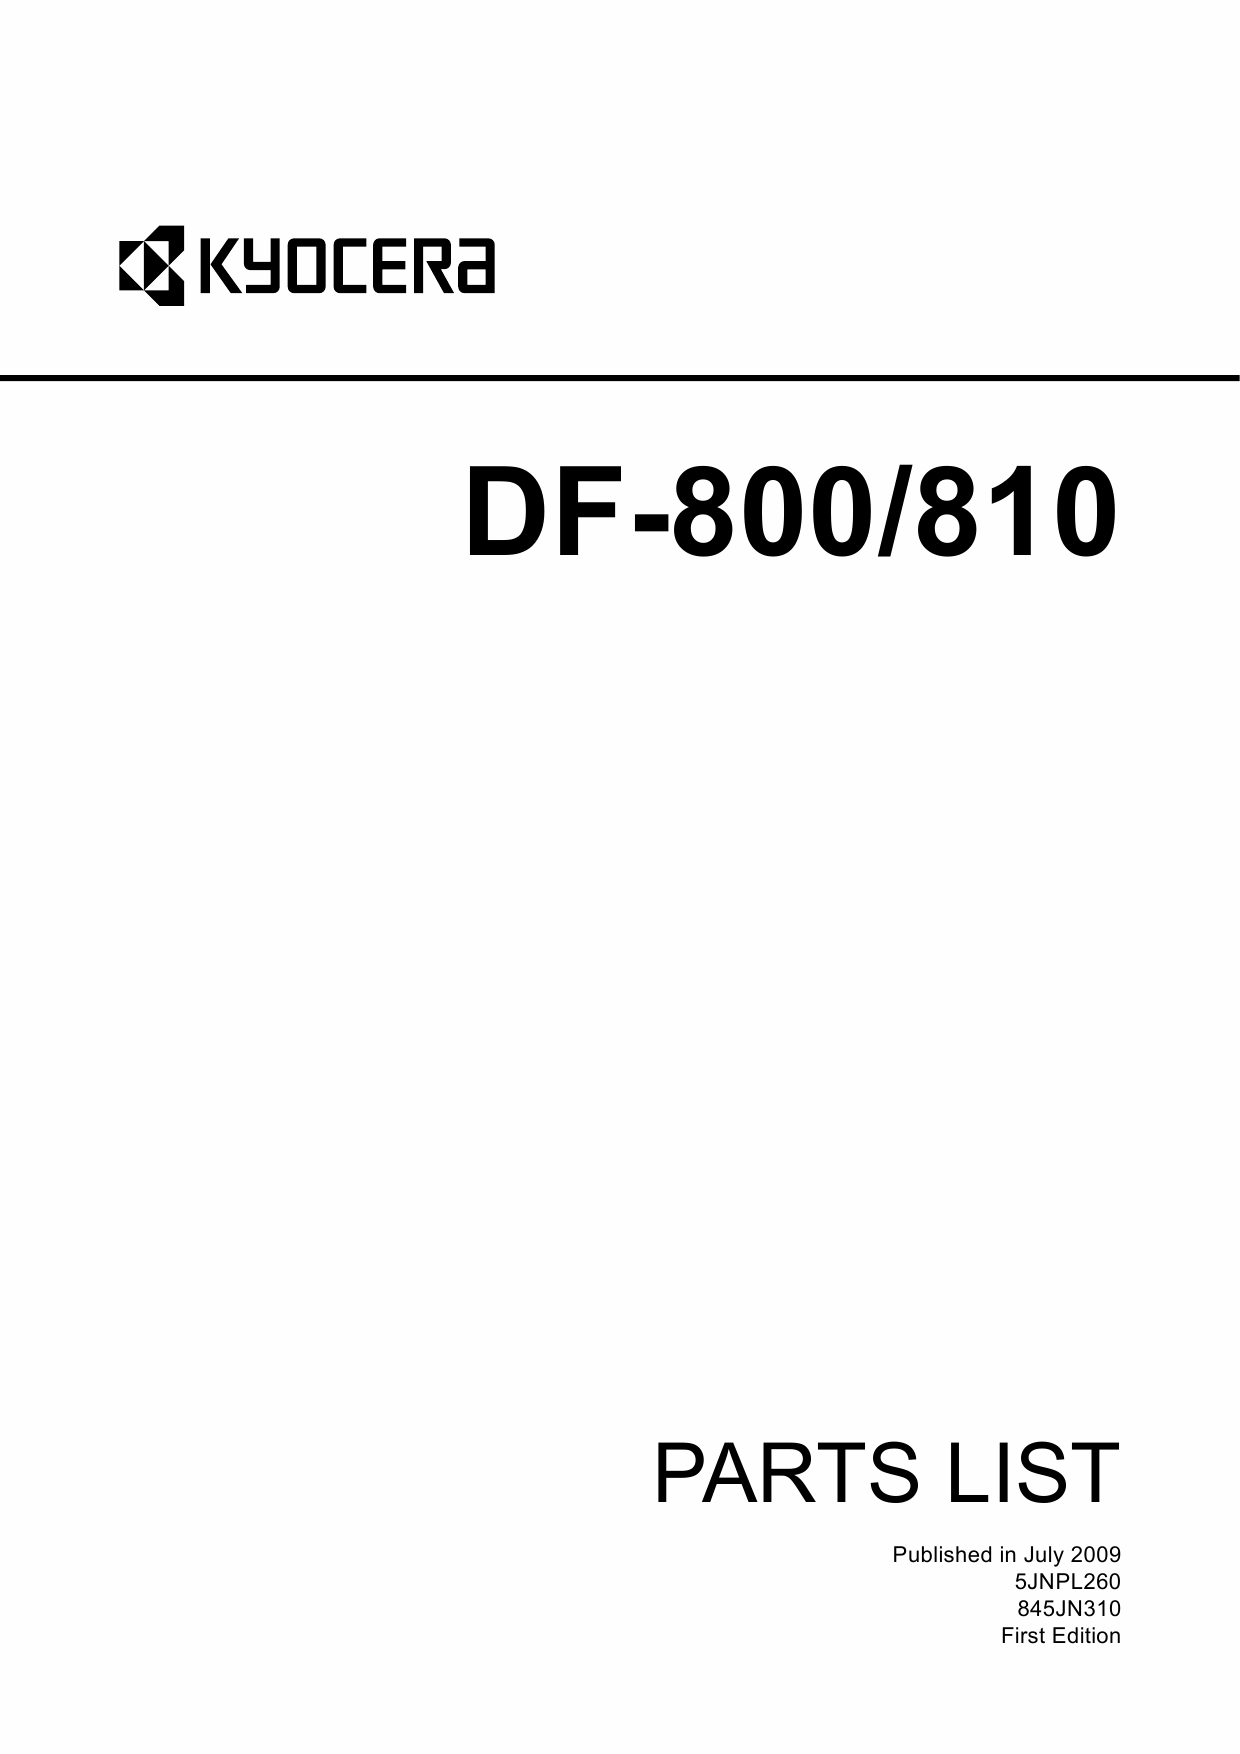 KYOCERA Options Document-Feeder DF-800 810 for-550c-650c-750c Parts Manual-1